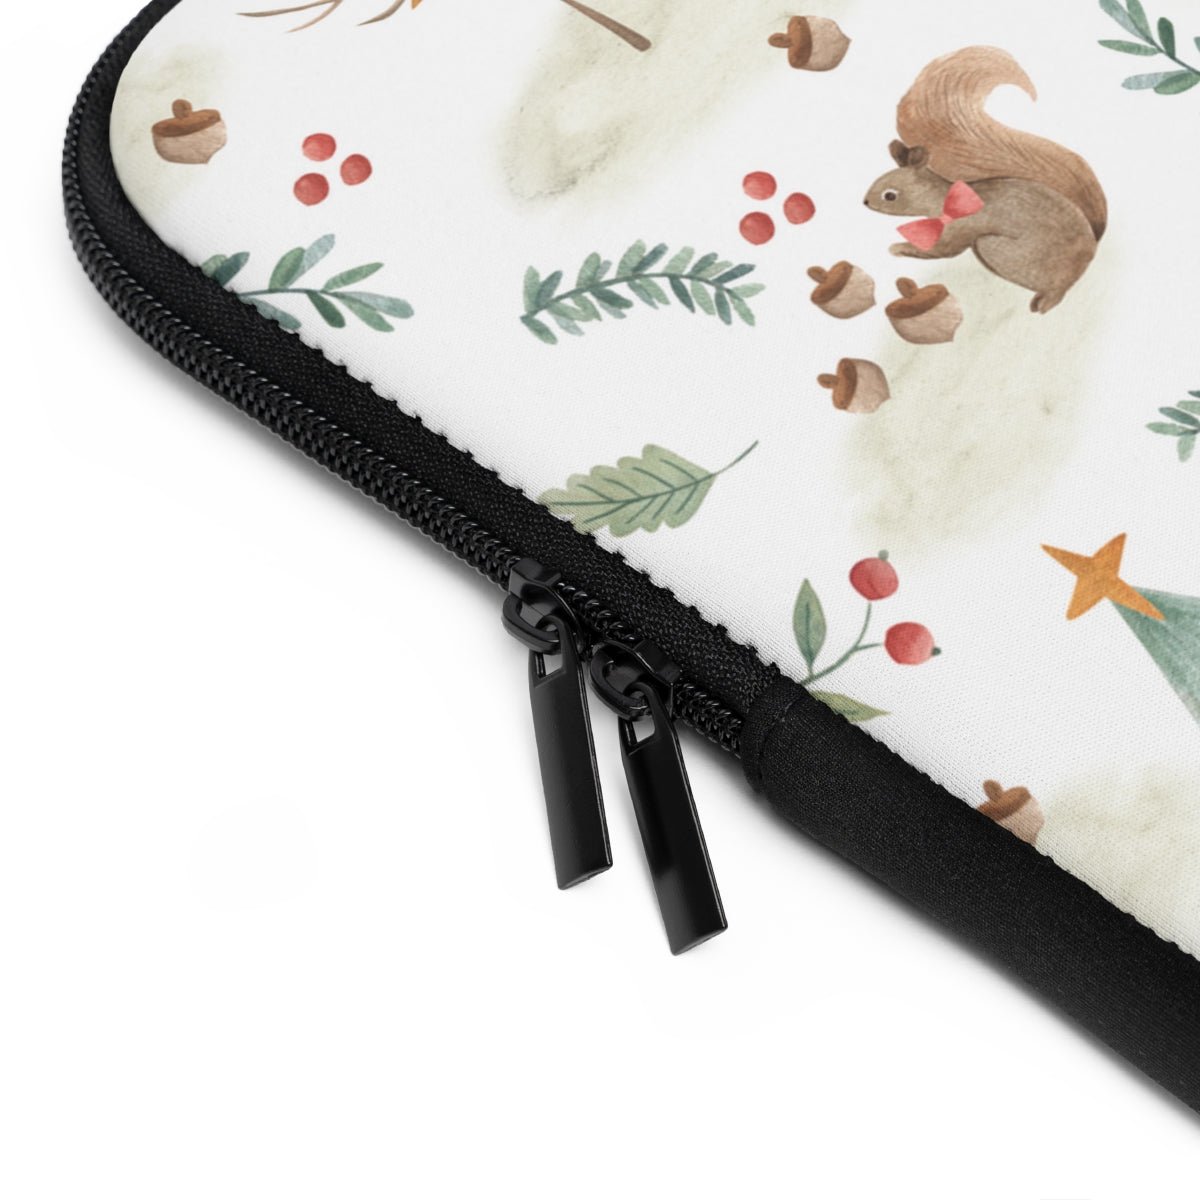 Christmas Woodland Animals Laptop Sleeve - Puffin Lime